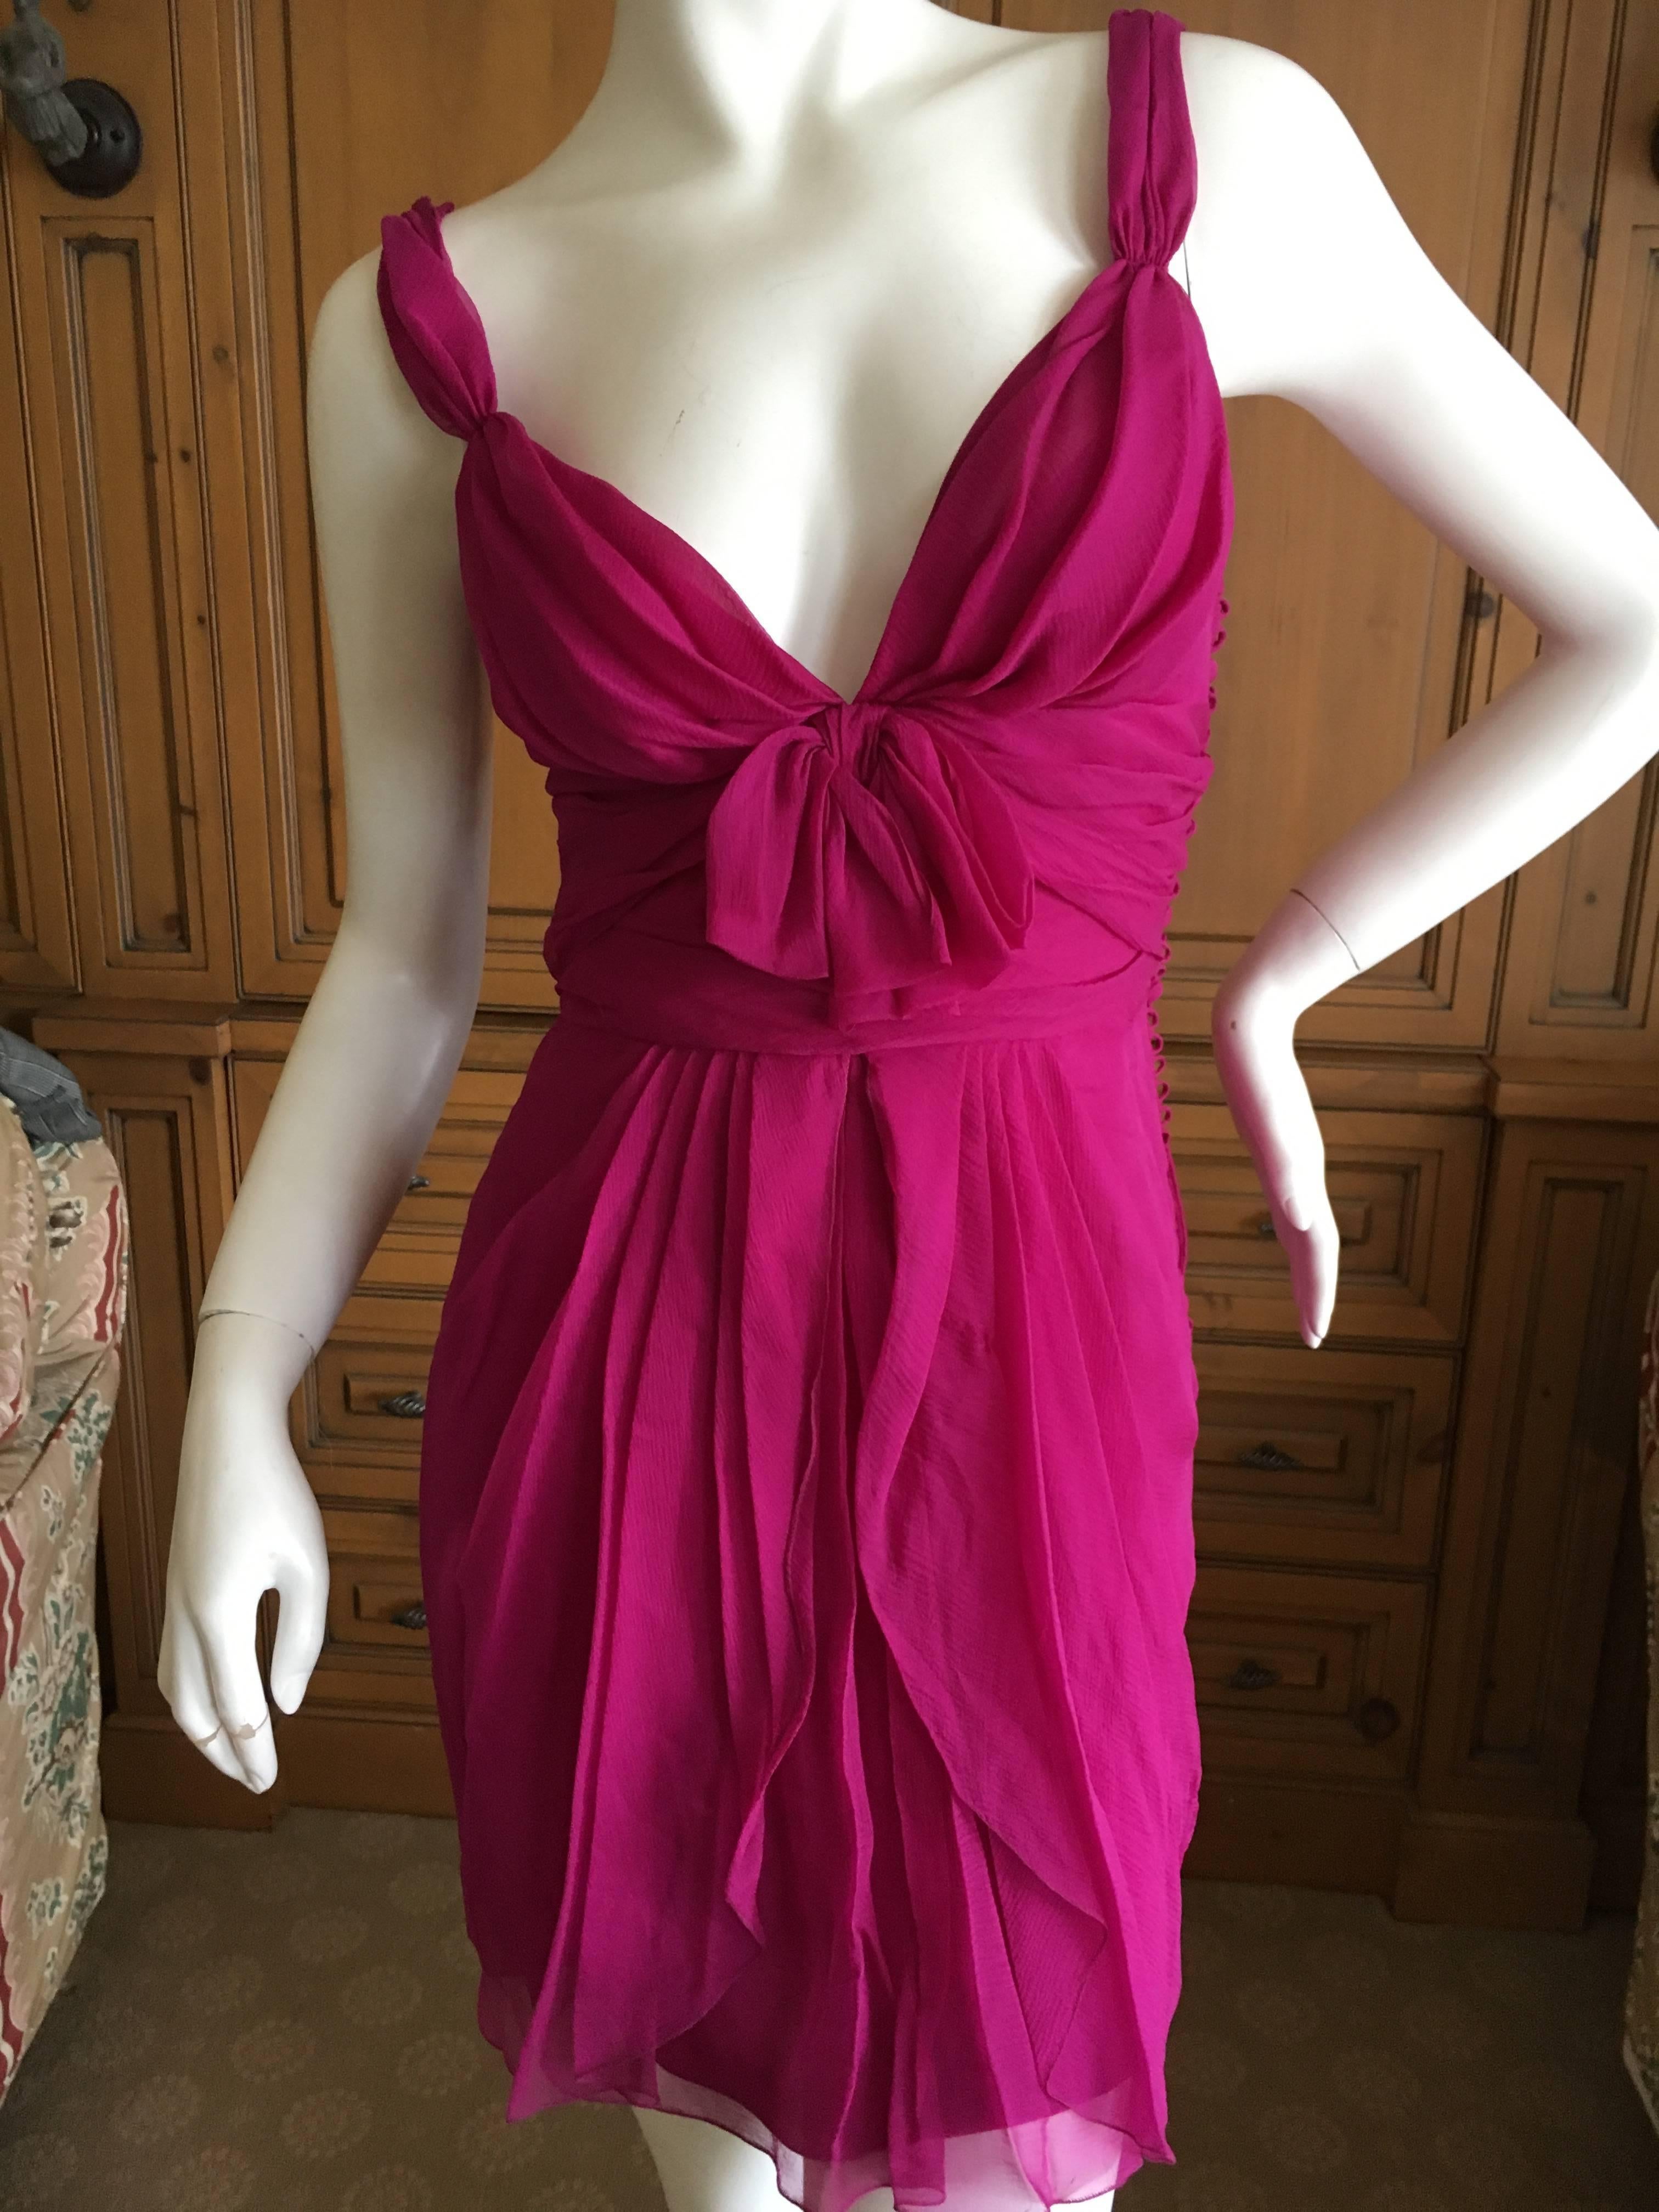 Christian Dior by John Galliano Raspberry Silk Chiffon Tunic or Mini Dress In Excellent Condition For Sale In Cloverdale, CA